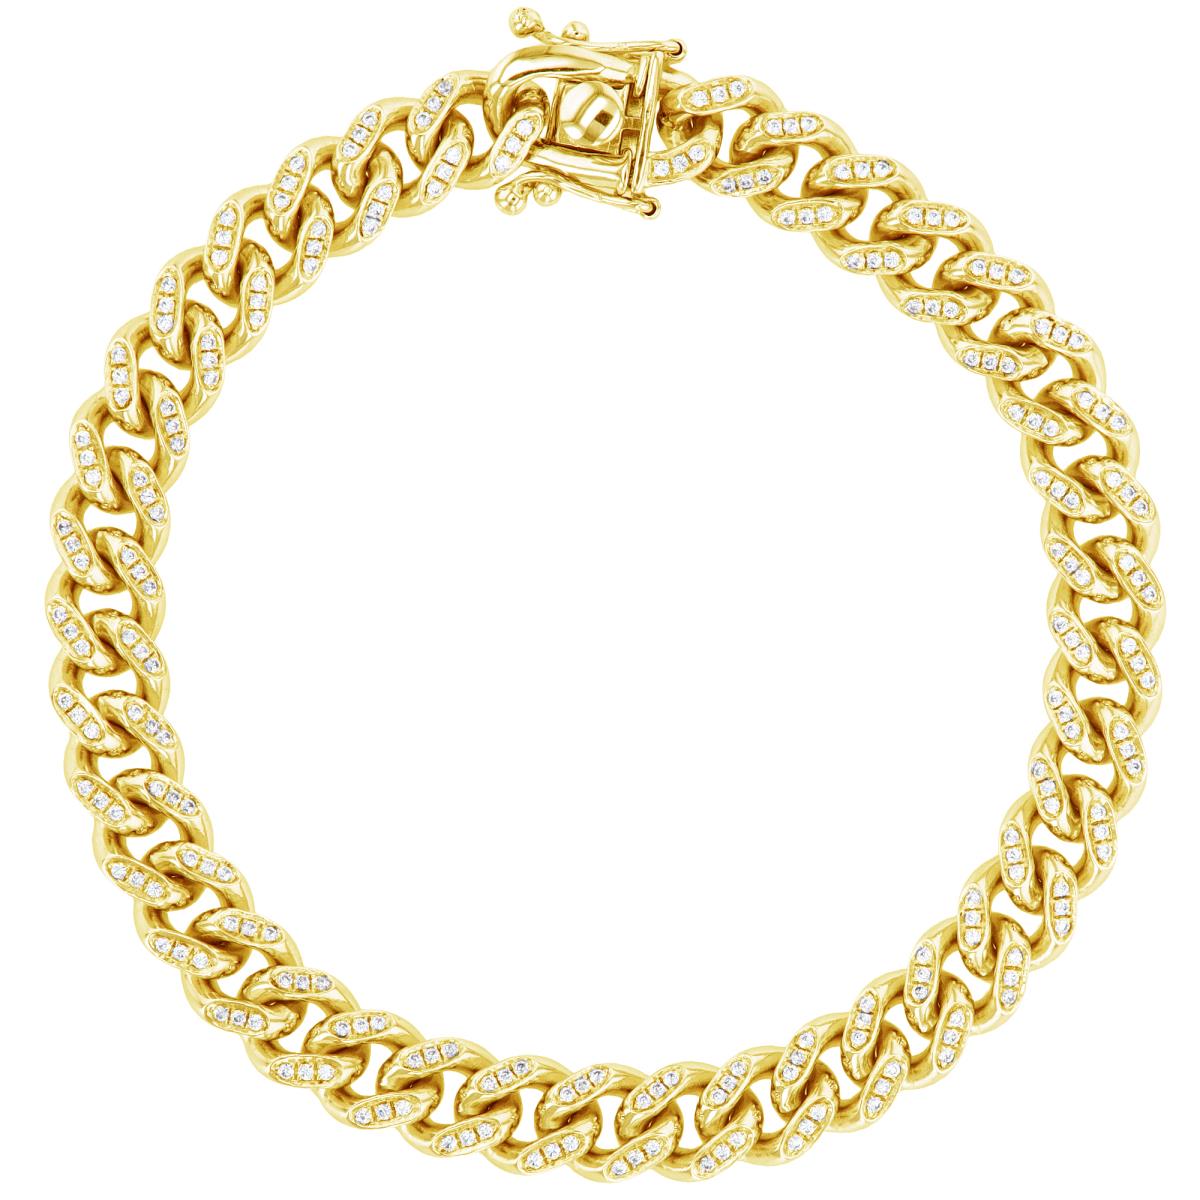 14K Yellow Gold 1.13 CTTW Diamond Pave 8mm Solid Miami Cuban 250 8.50" Chain Bracelet With Box Lock